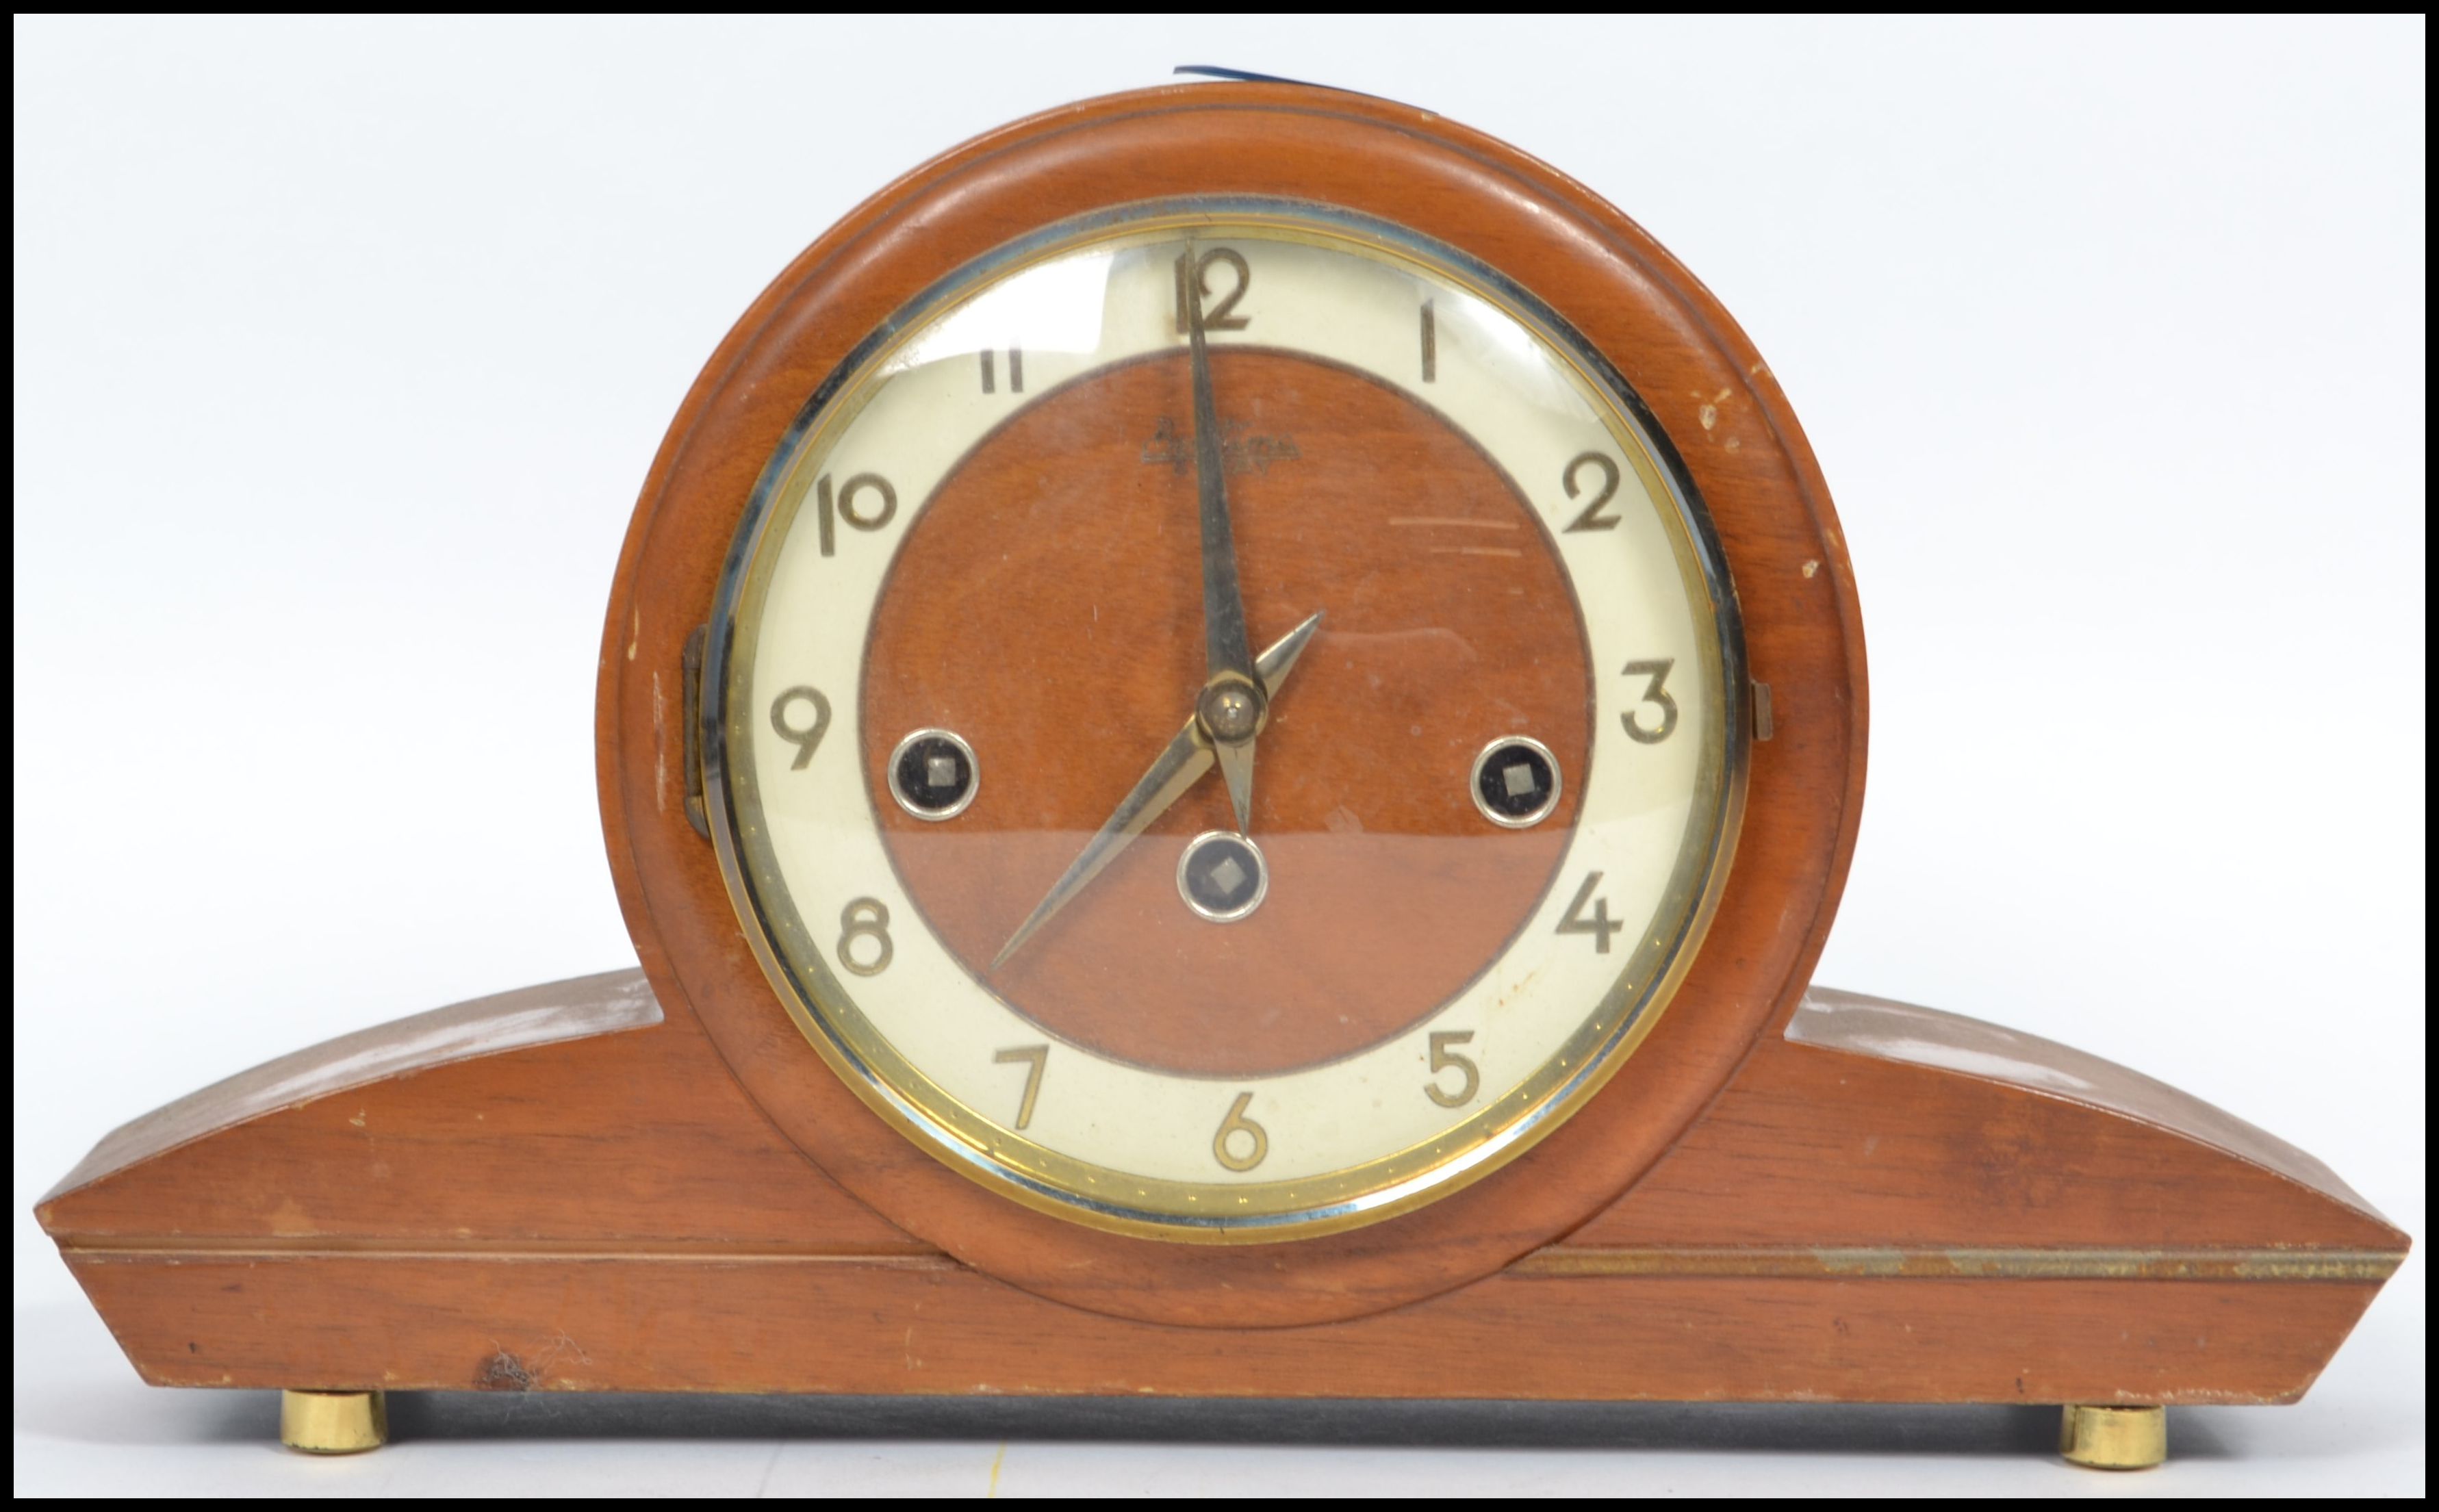 A vintage art deco style wooden cased mantle clock by Bentima having an circular face with sloped